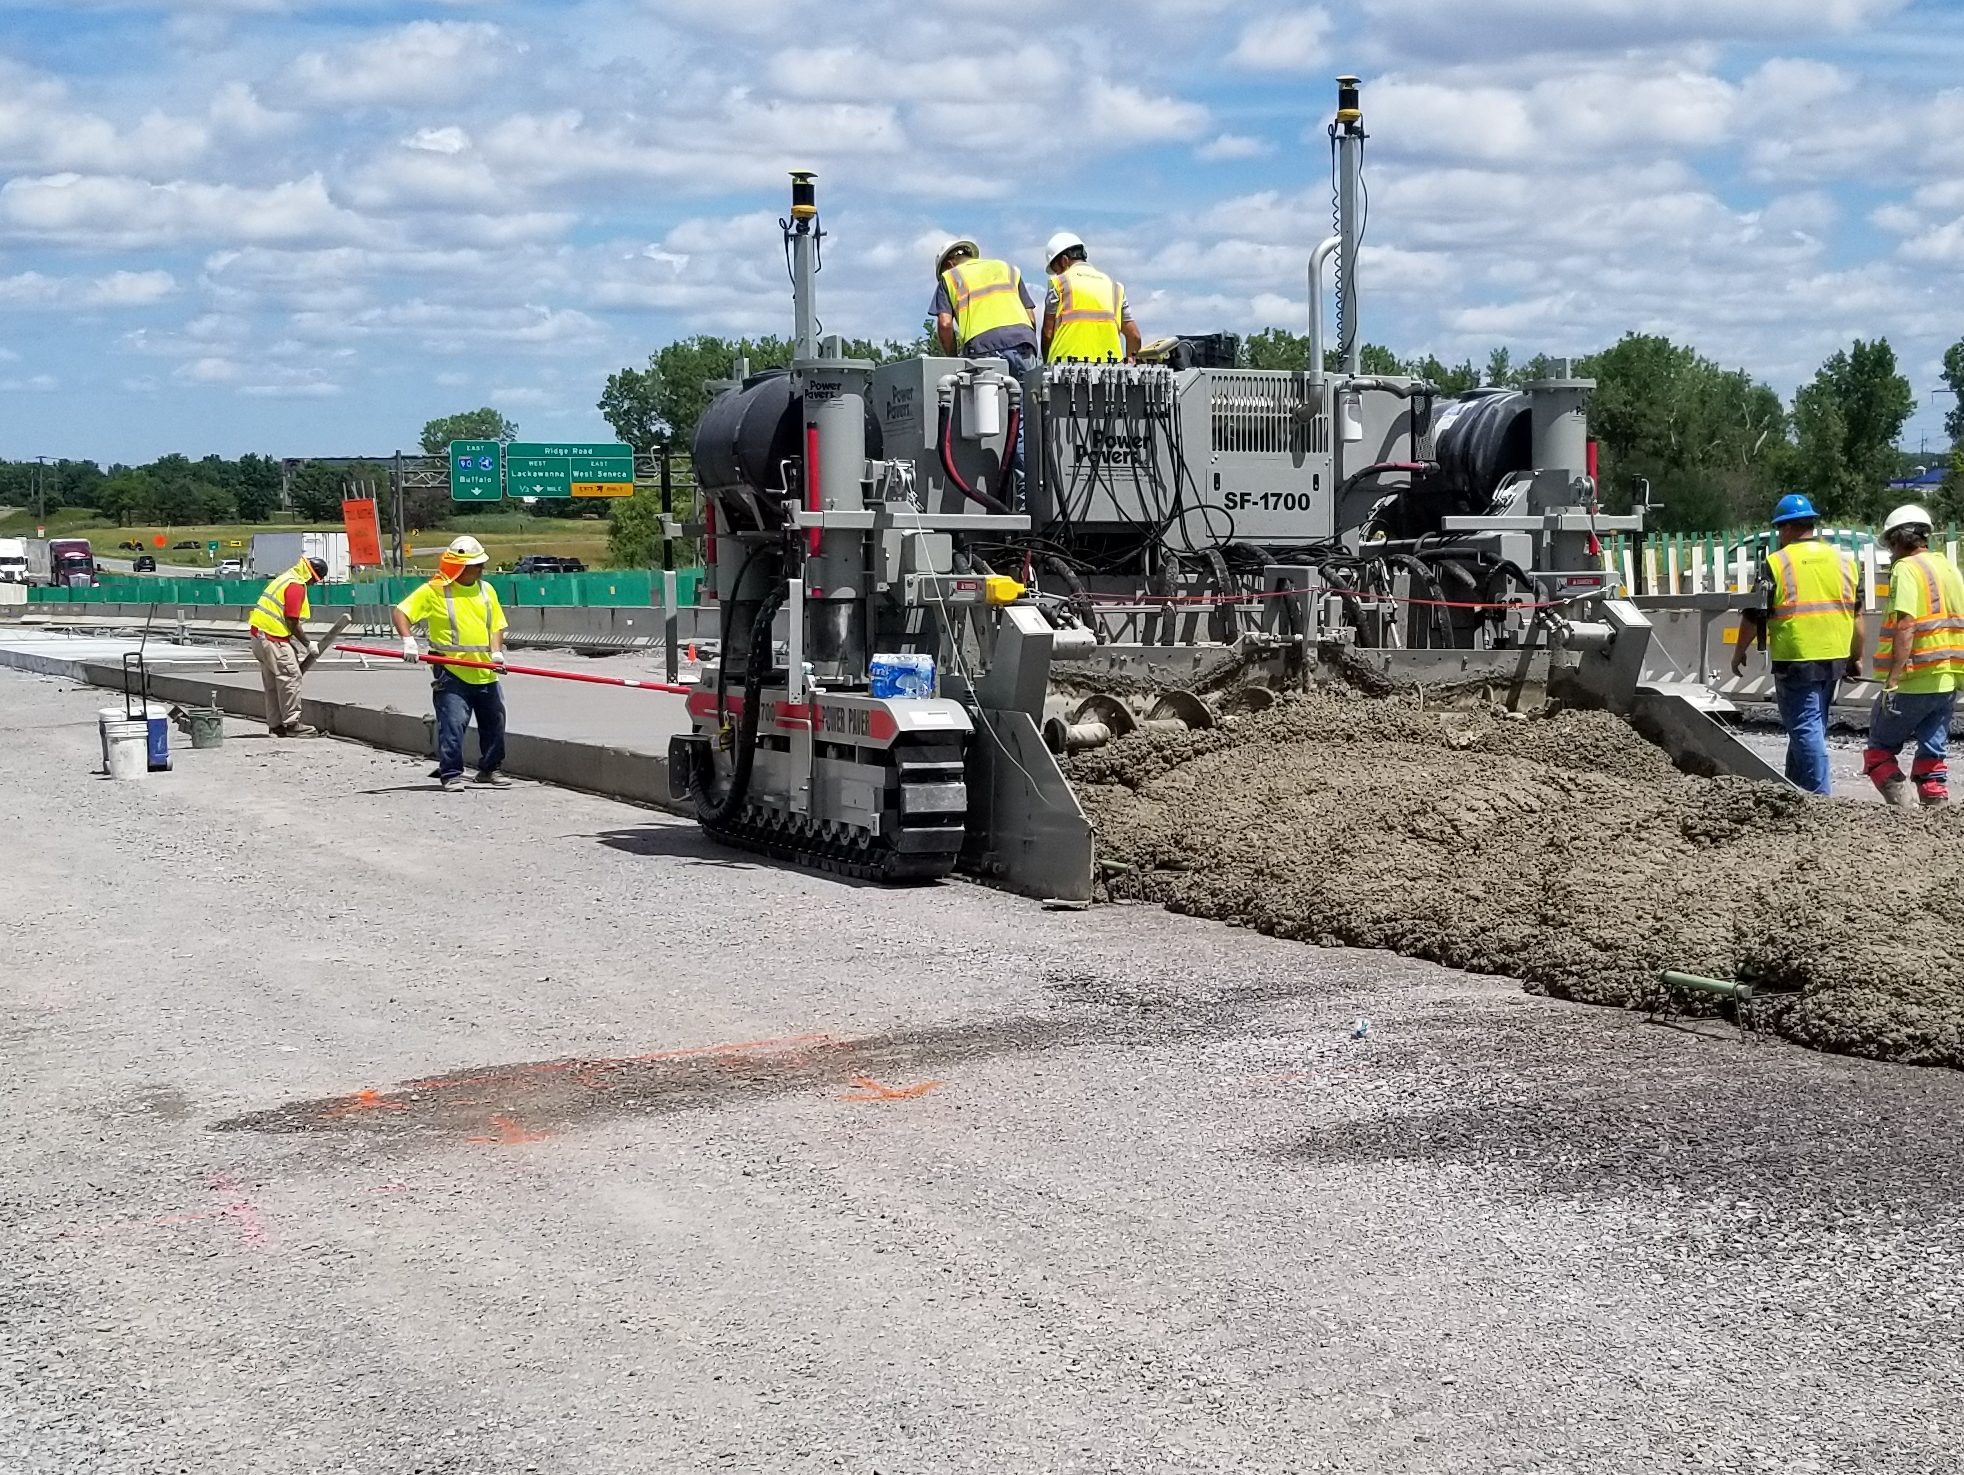 Power Paver SF-1700 paving a highway